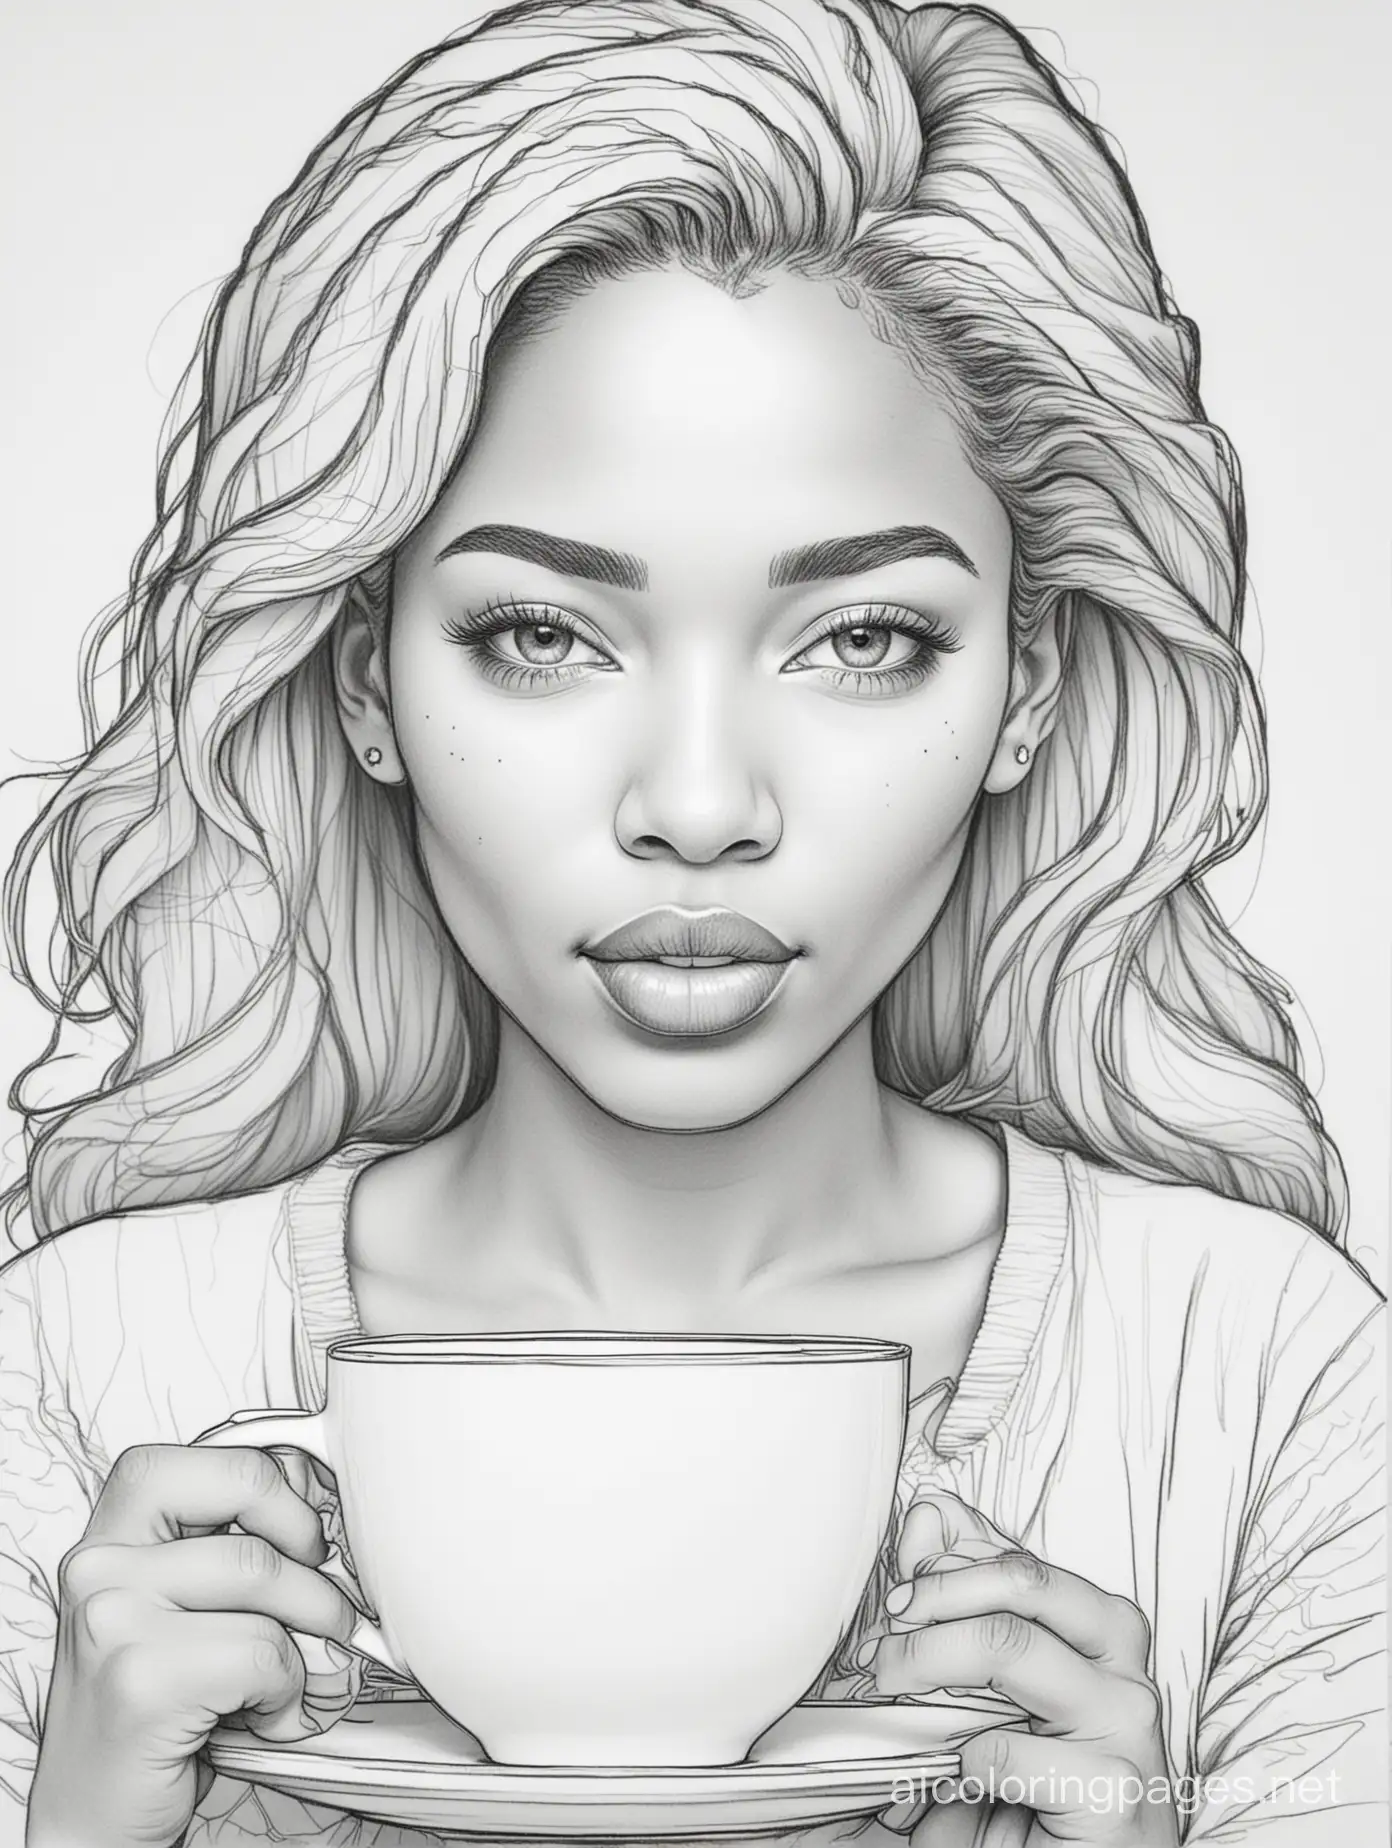 Black woman face sipping coffee, Coloring Page, black and white, line art, white background, Simplicity, Ample White Space. The background of the coloring page is plain white to make it easy for young children to color within the lines. The outlines of all the subjects are easy to distinguish, making it simple for kids to color without too much difficulty